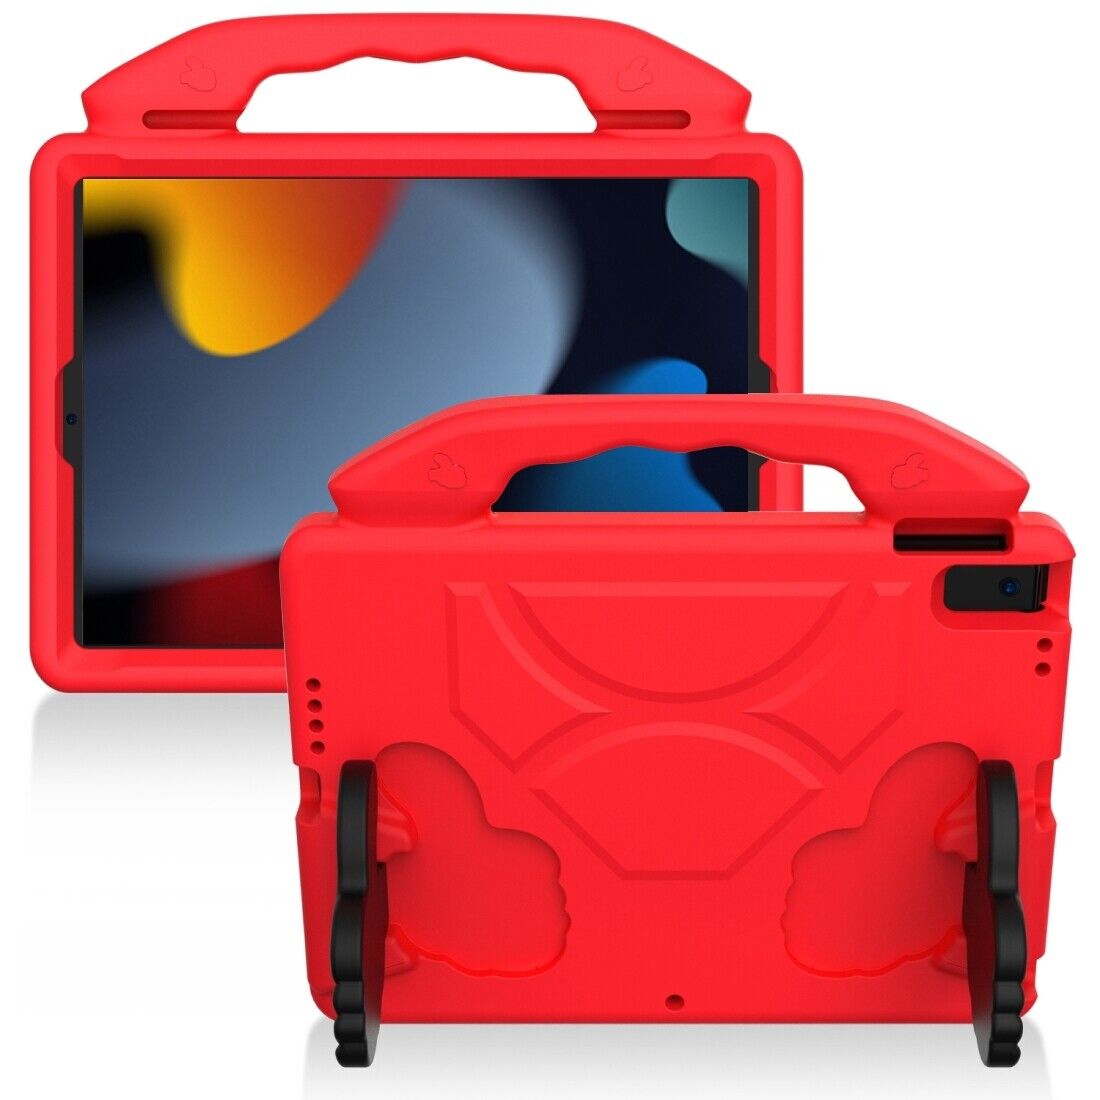 For Apple iPad 10.2 8th Gen 2020 Kids Friendly Case Shockproof Cover With Thumbs Up - Red-www.firsthelptech.ie